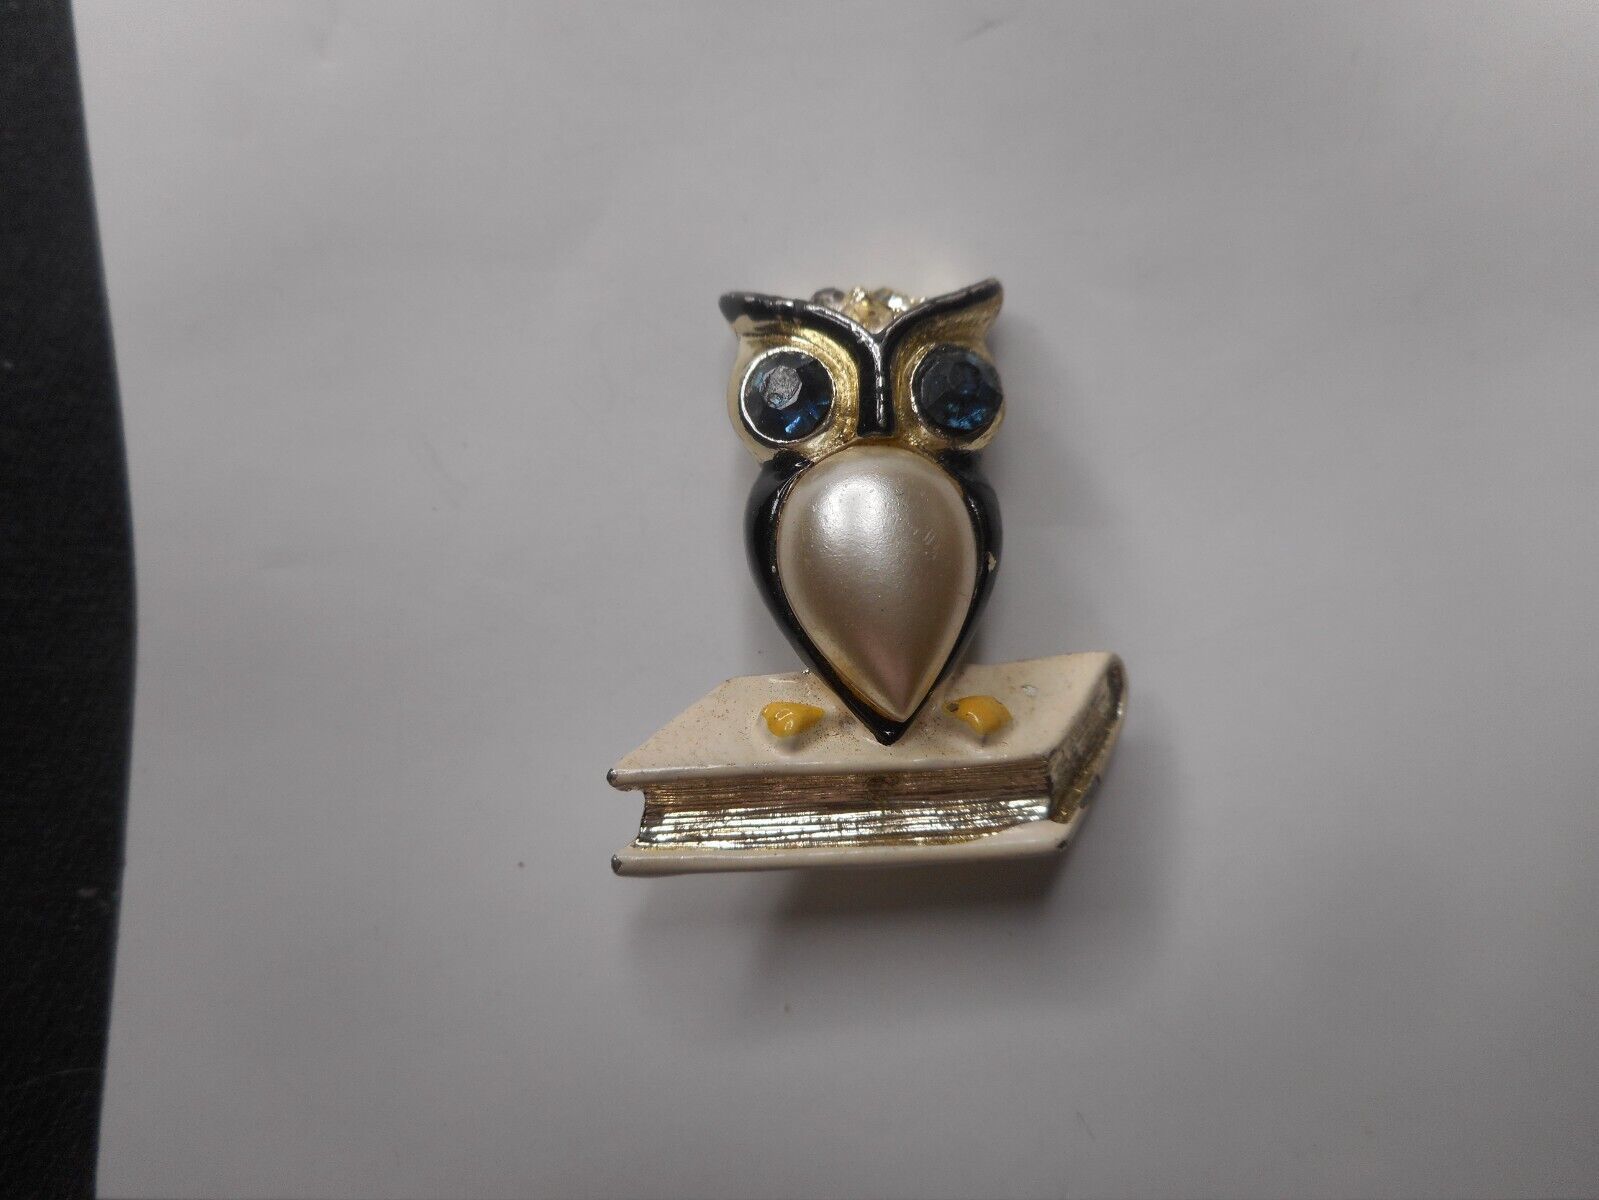 Primary image for Owl On Book Brooch Black White Blue Faceted Rhinestone Eyes Faux Teardrop Pearl